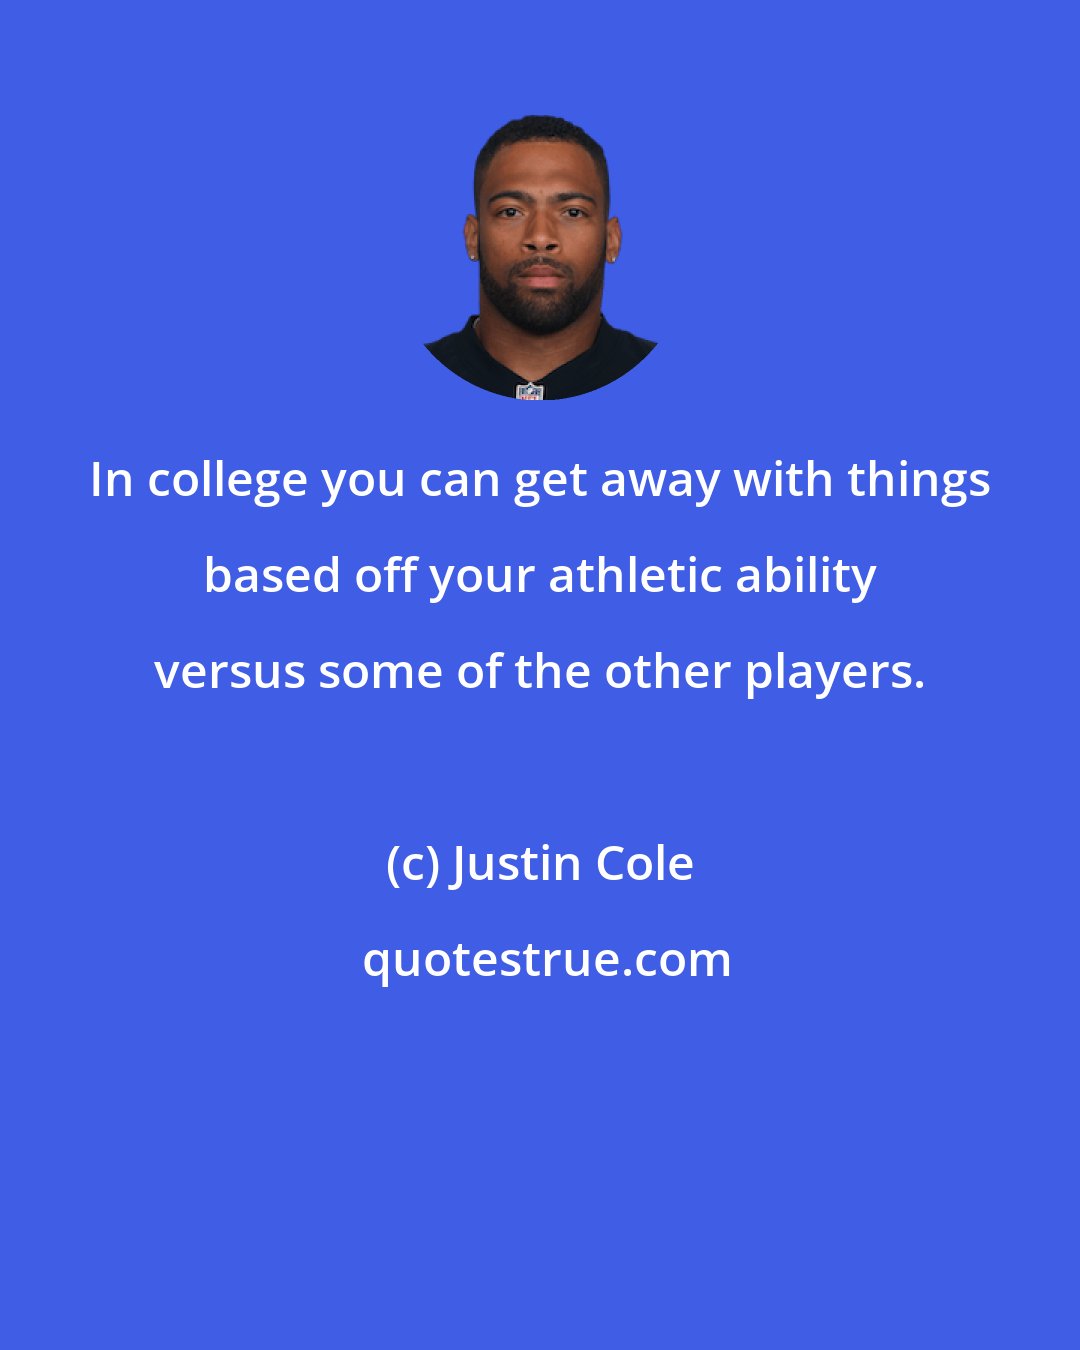 Justin Cole: In college you can get away with things based off your athletic ability versus some of the other players.